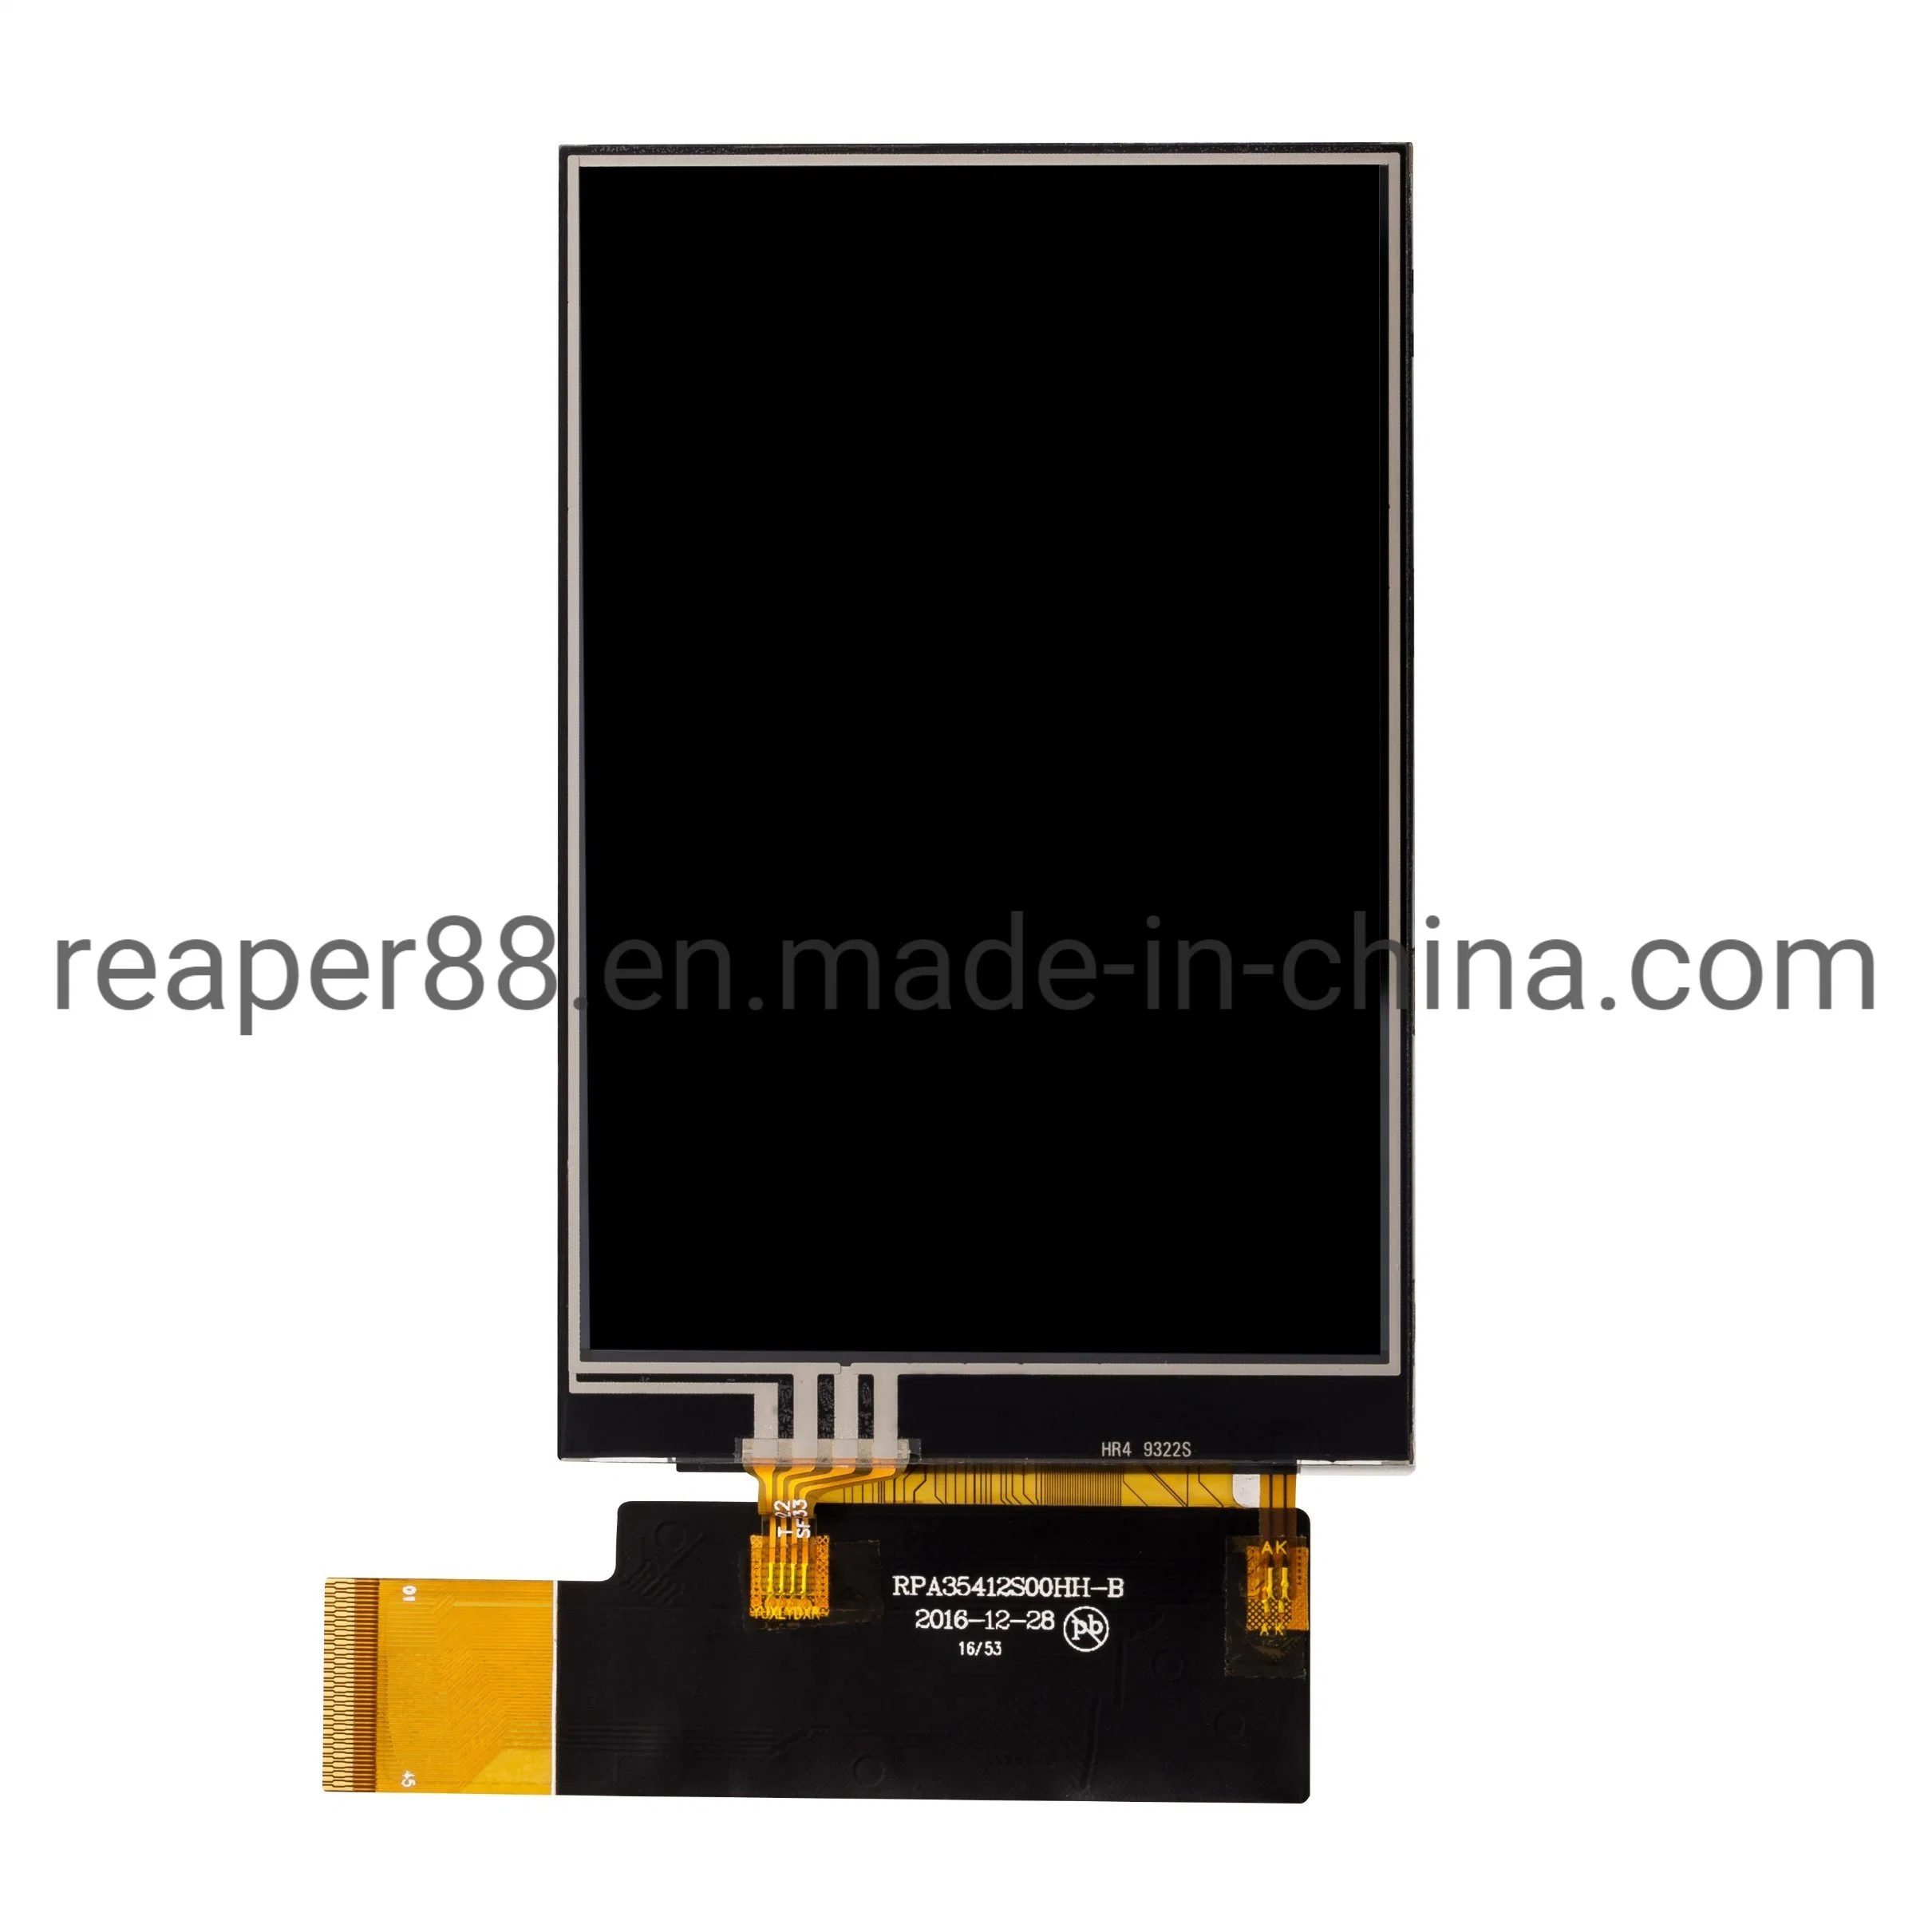 TFT LCD Screen 3.5 Inch Hvga 320X480 with Touch Panel